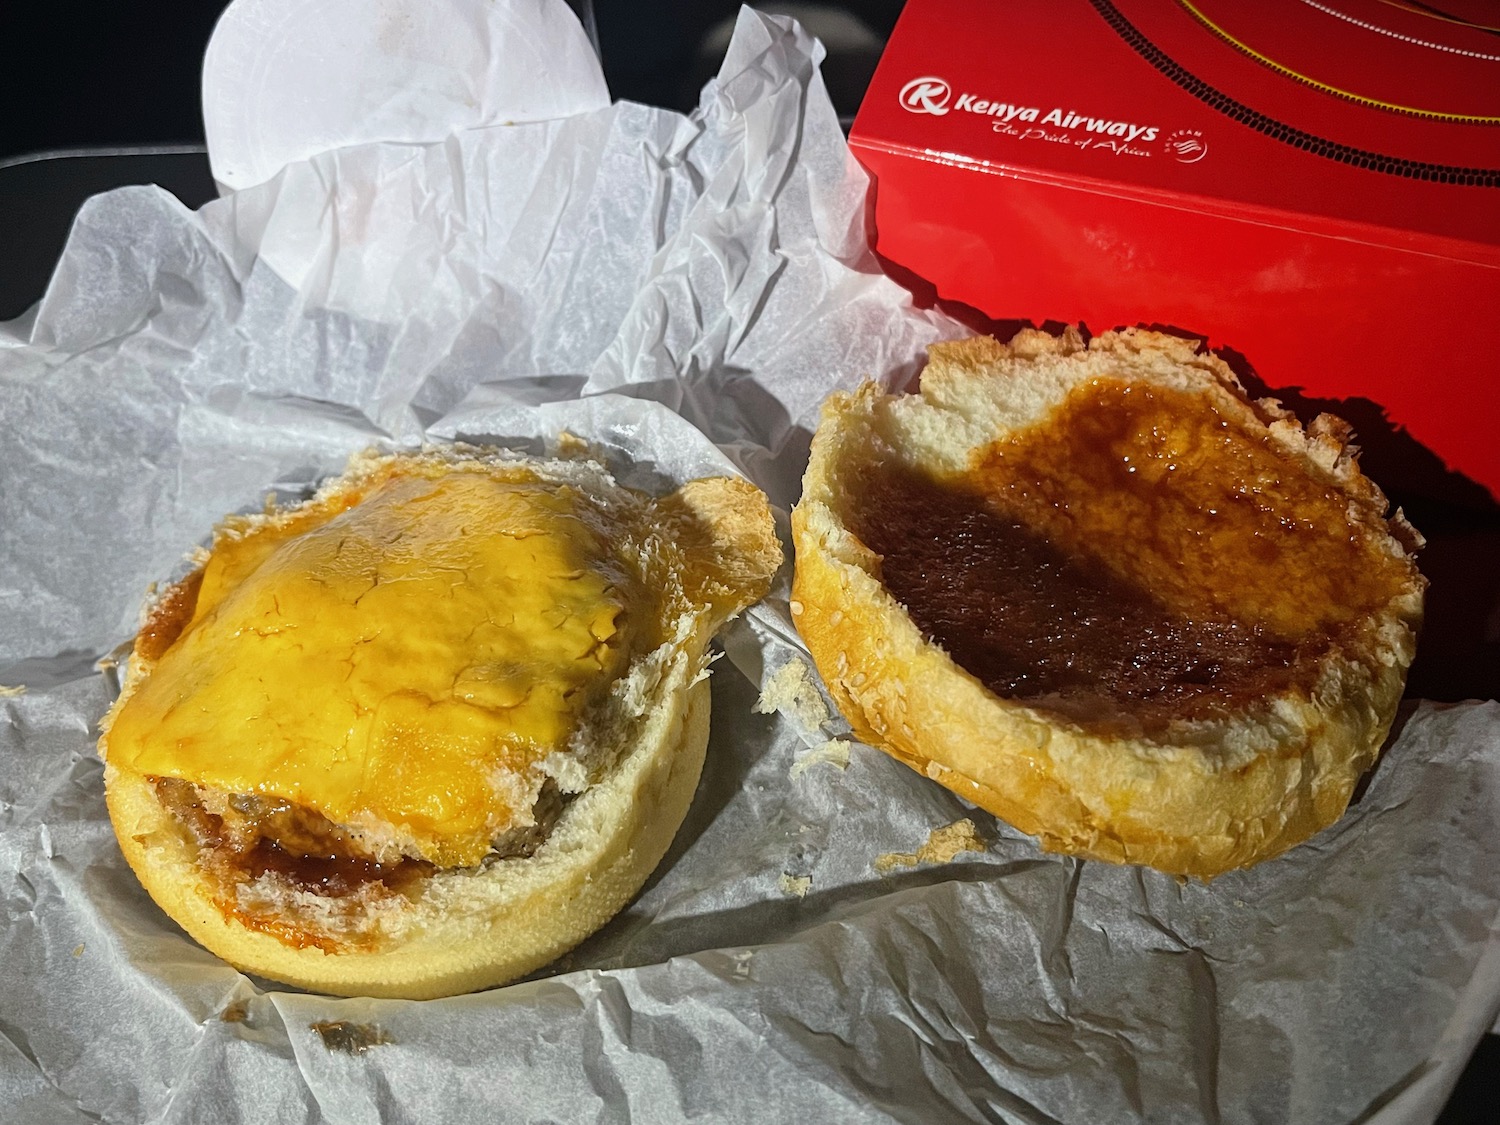 a burger with a cheese and jam on it